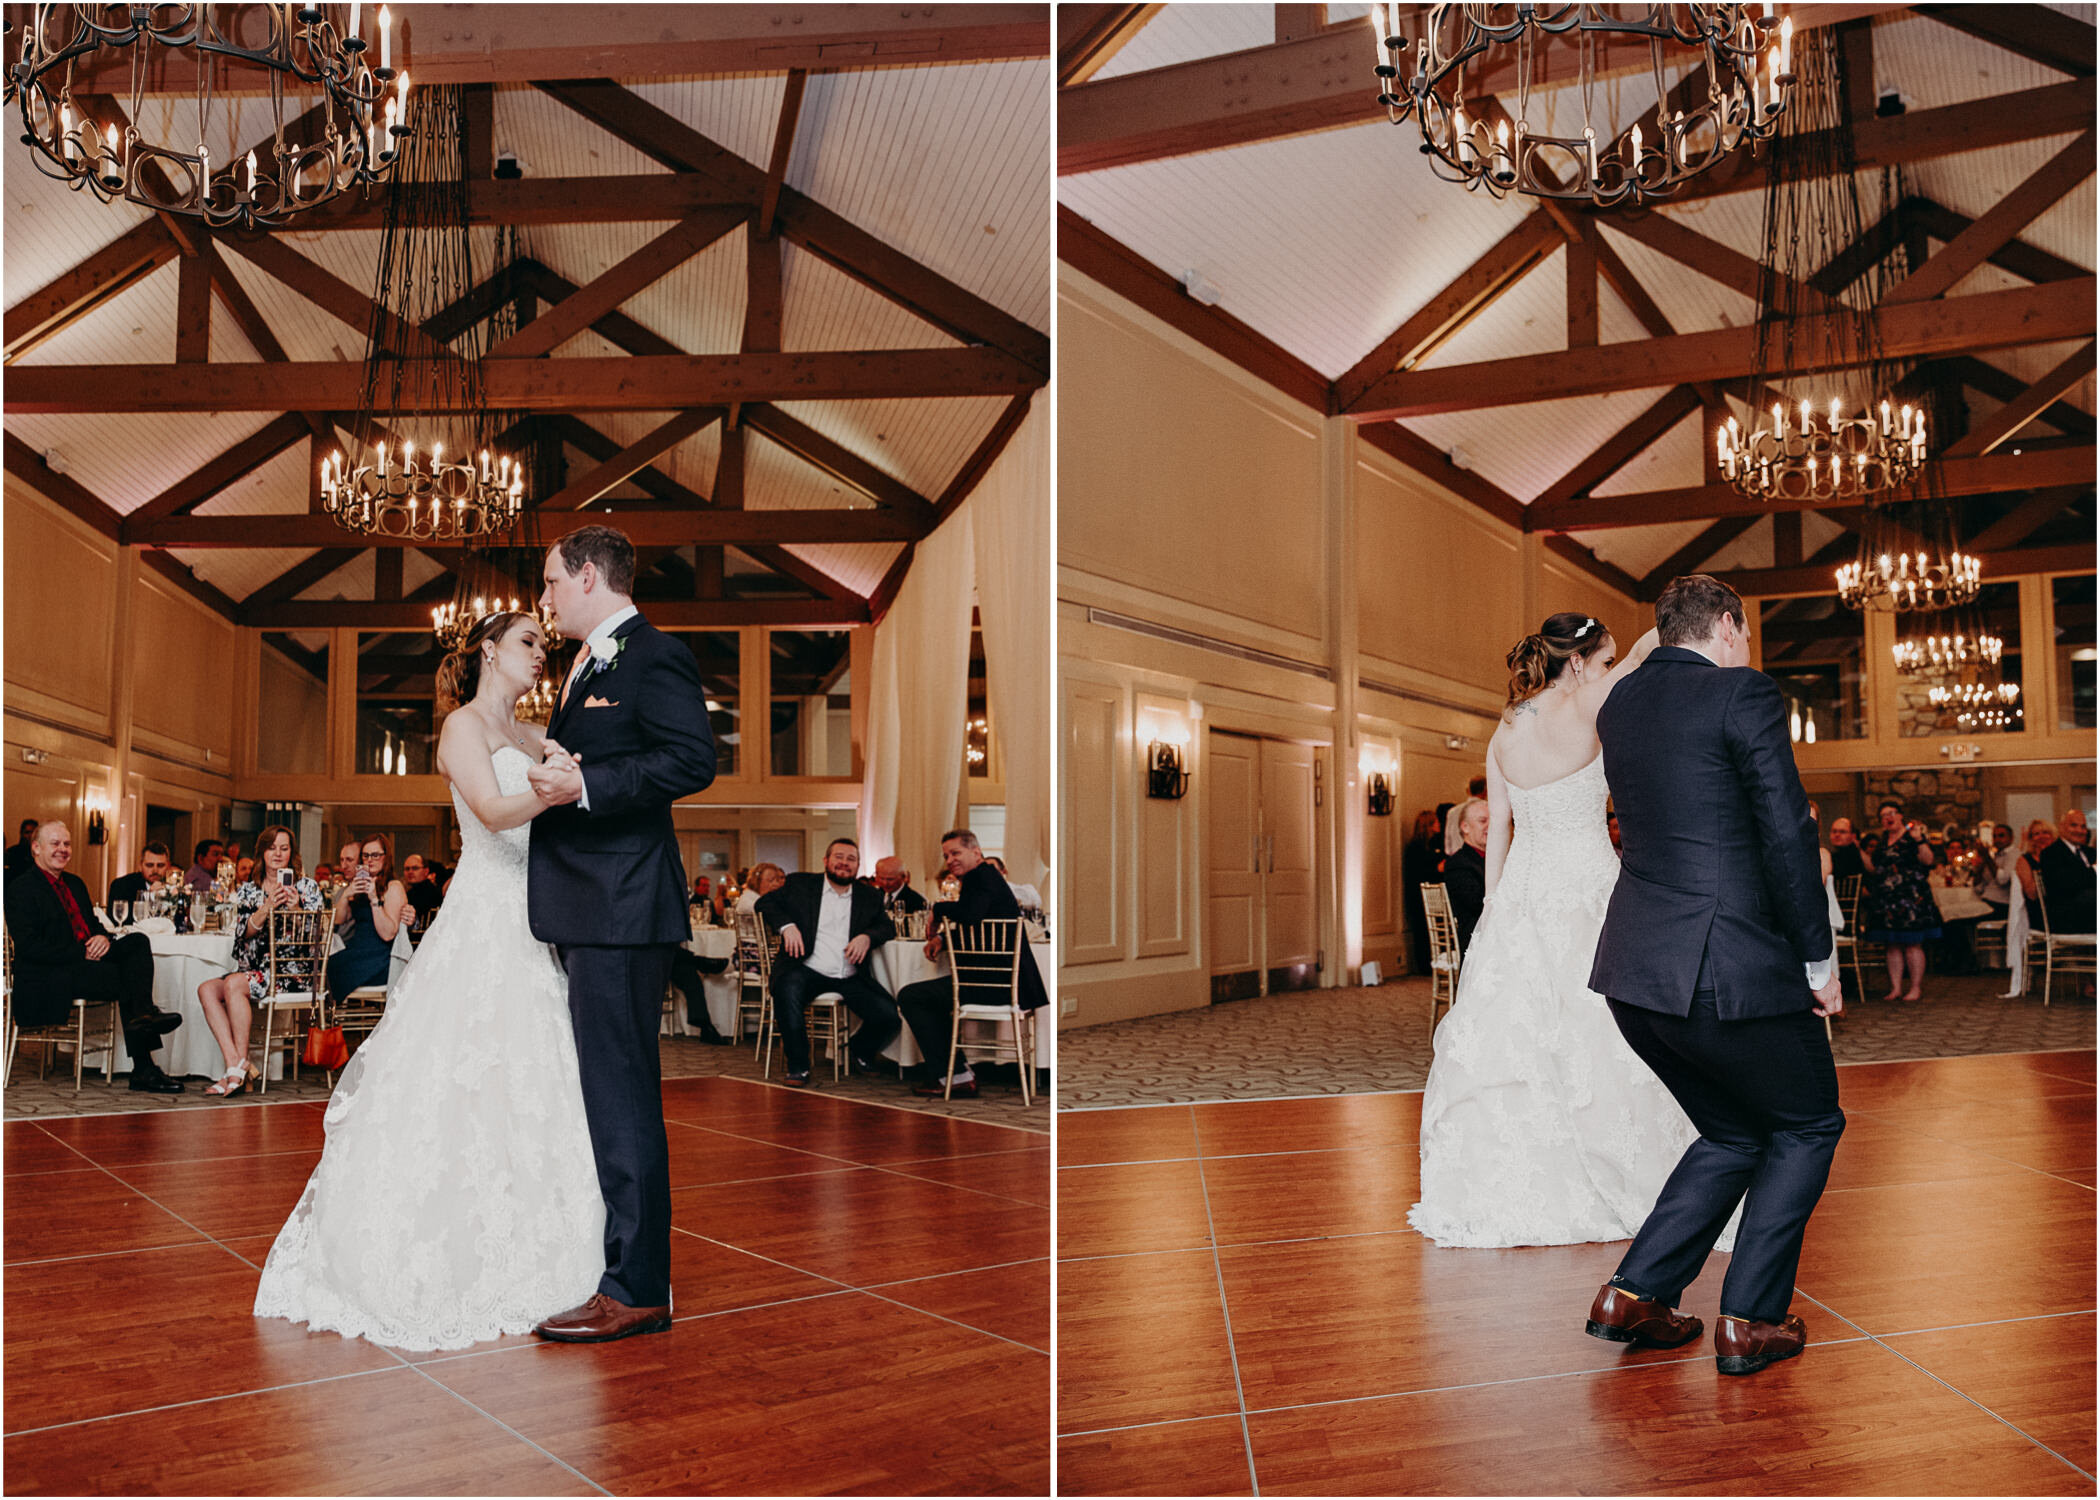 Christa & Ben's Wedding Day || Atlanta Spring Wedding at The Country Club of The South64.jpg